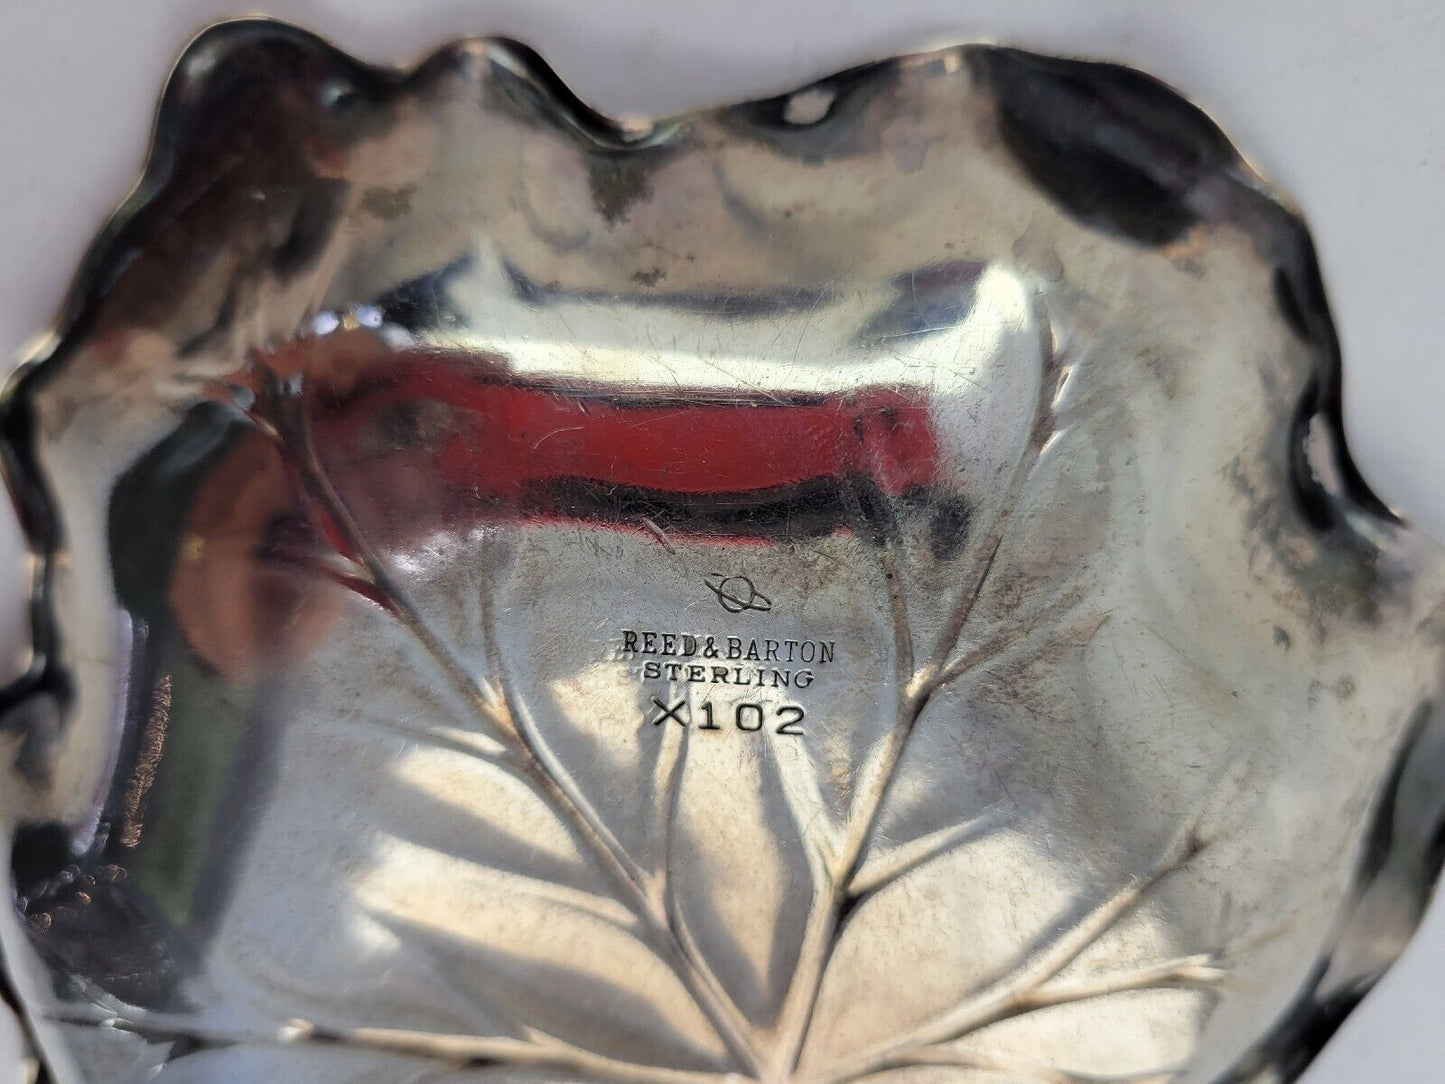 Reed and Barton Model X102 Sterling Maple Leaf Candy Dish 2.6oz.